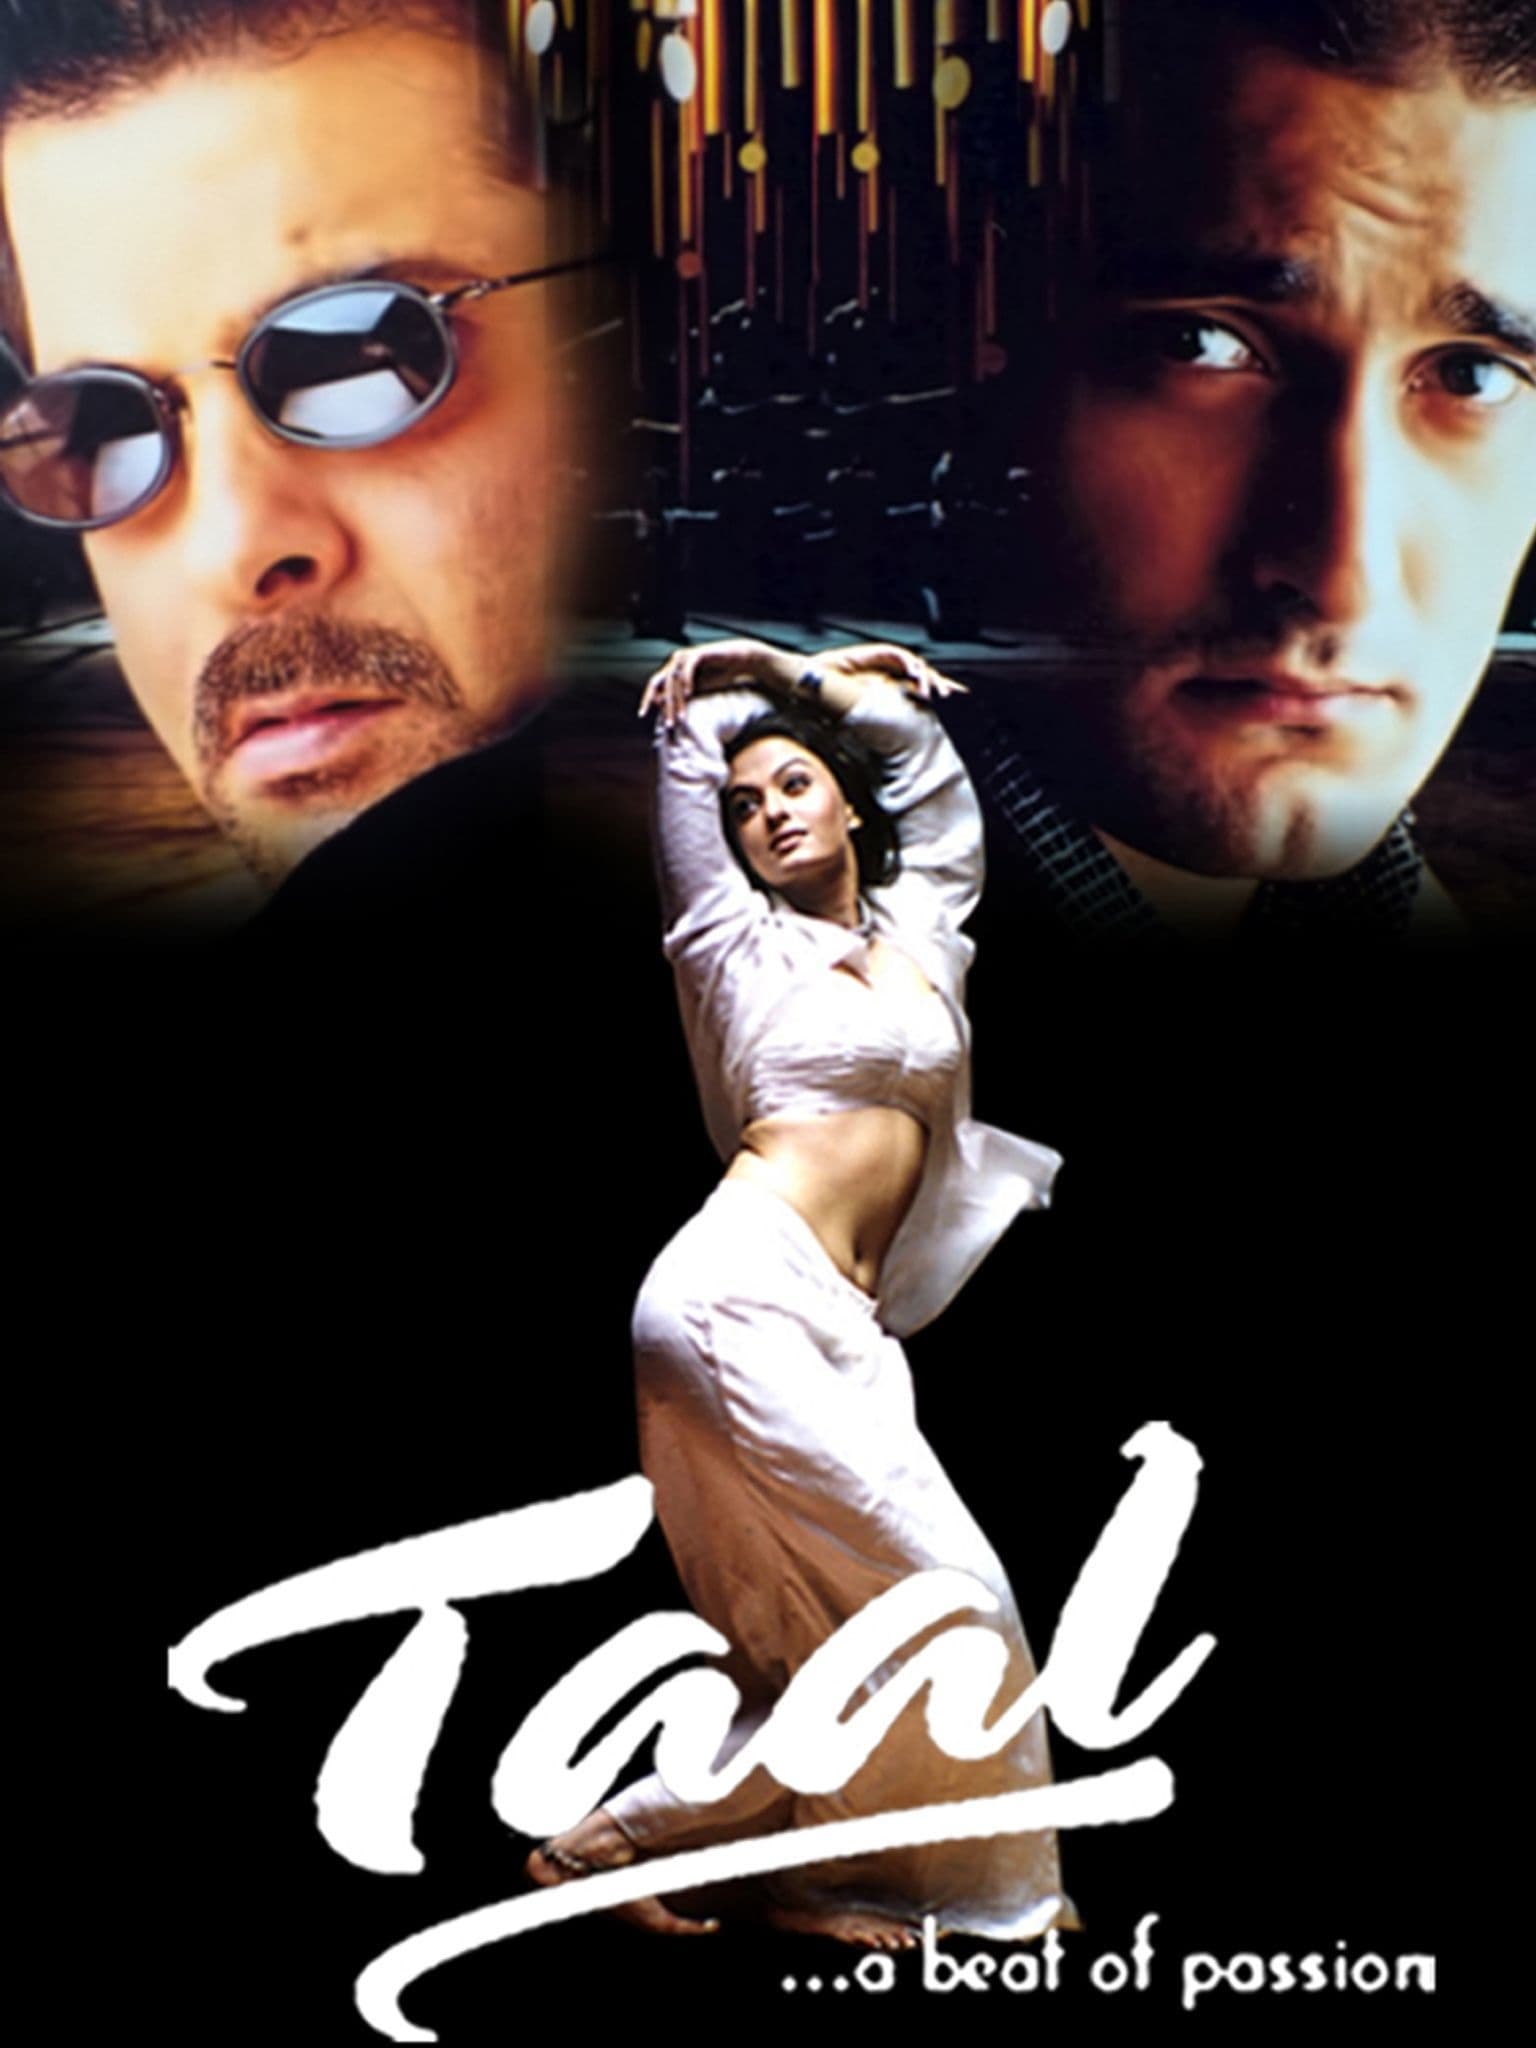 Poster for the movie "Taal"